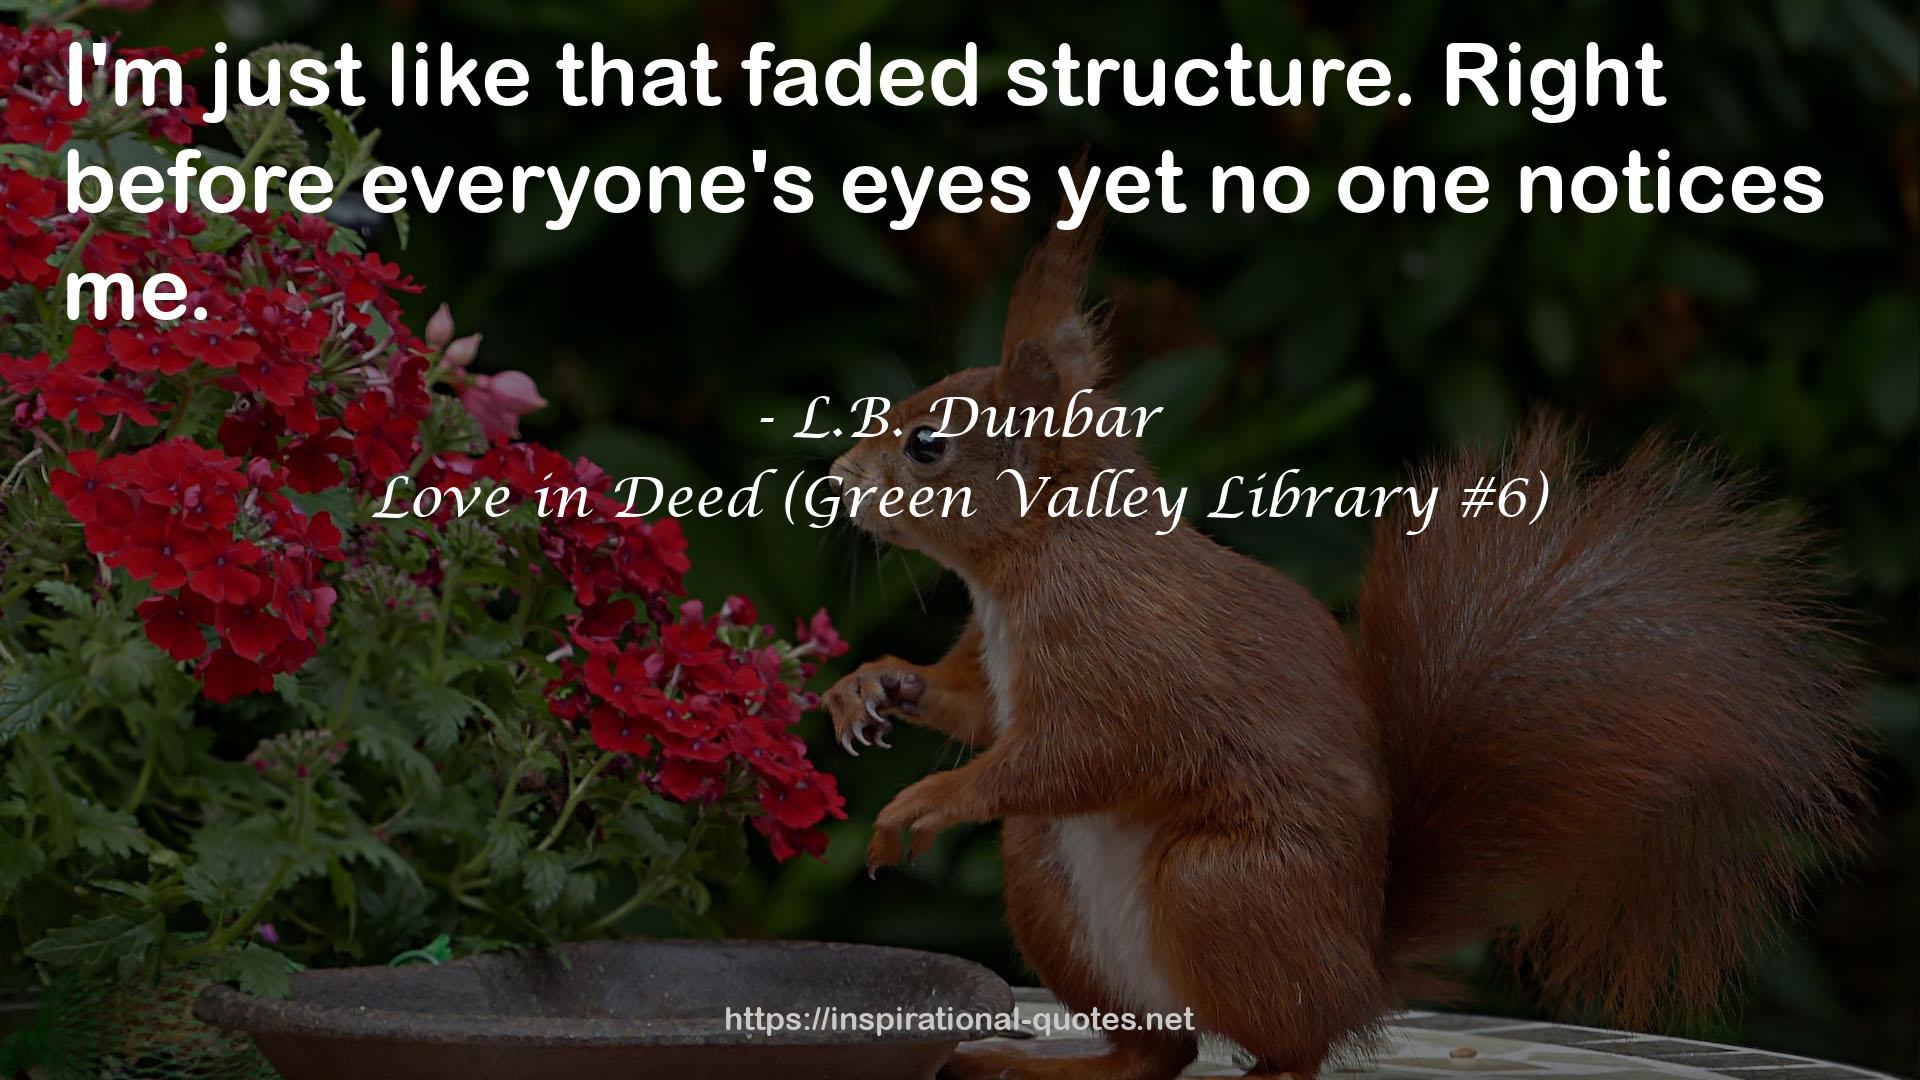 Love in Deed (Green Valley Library #6) QUOTES